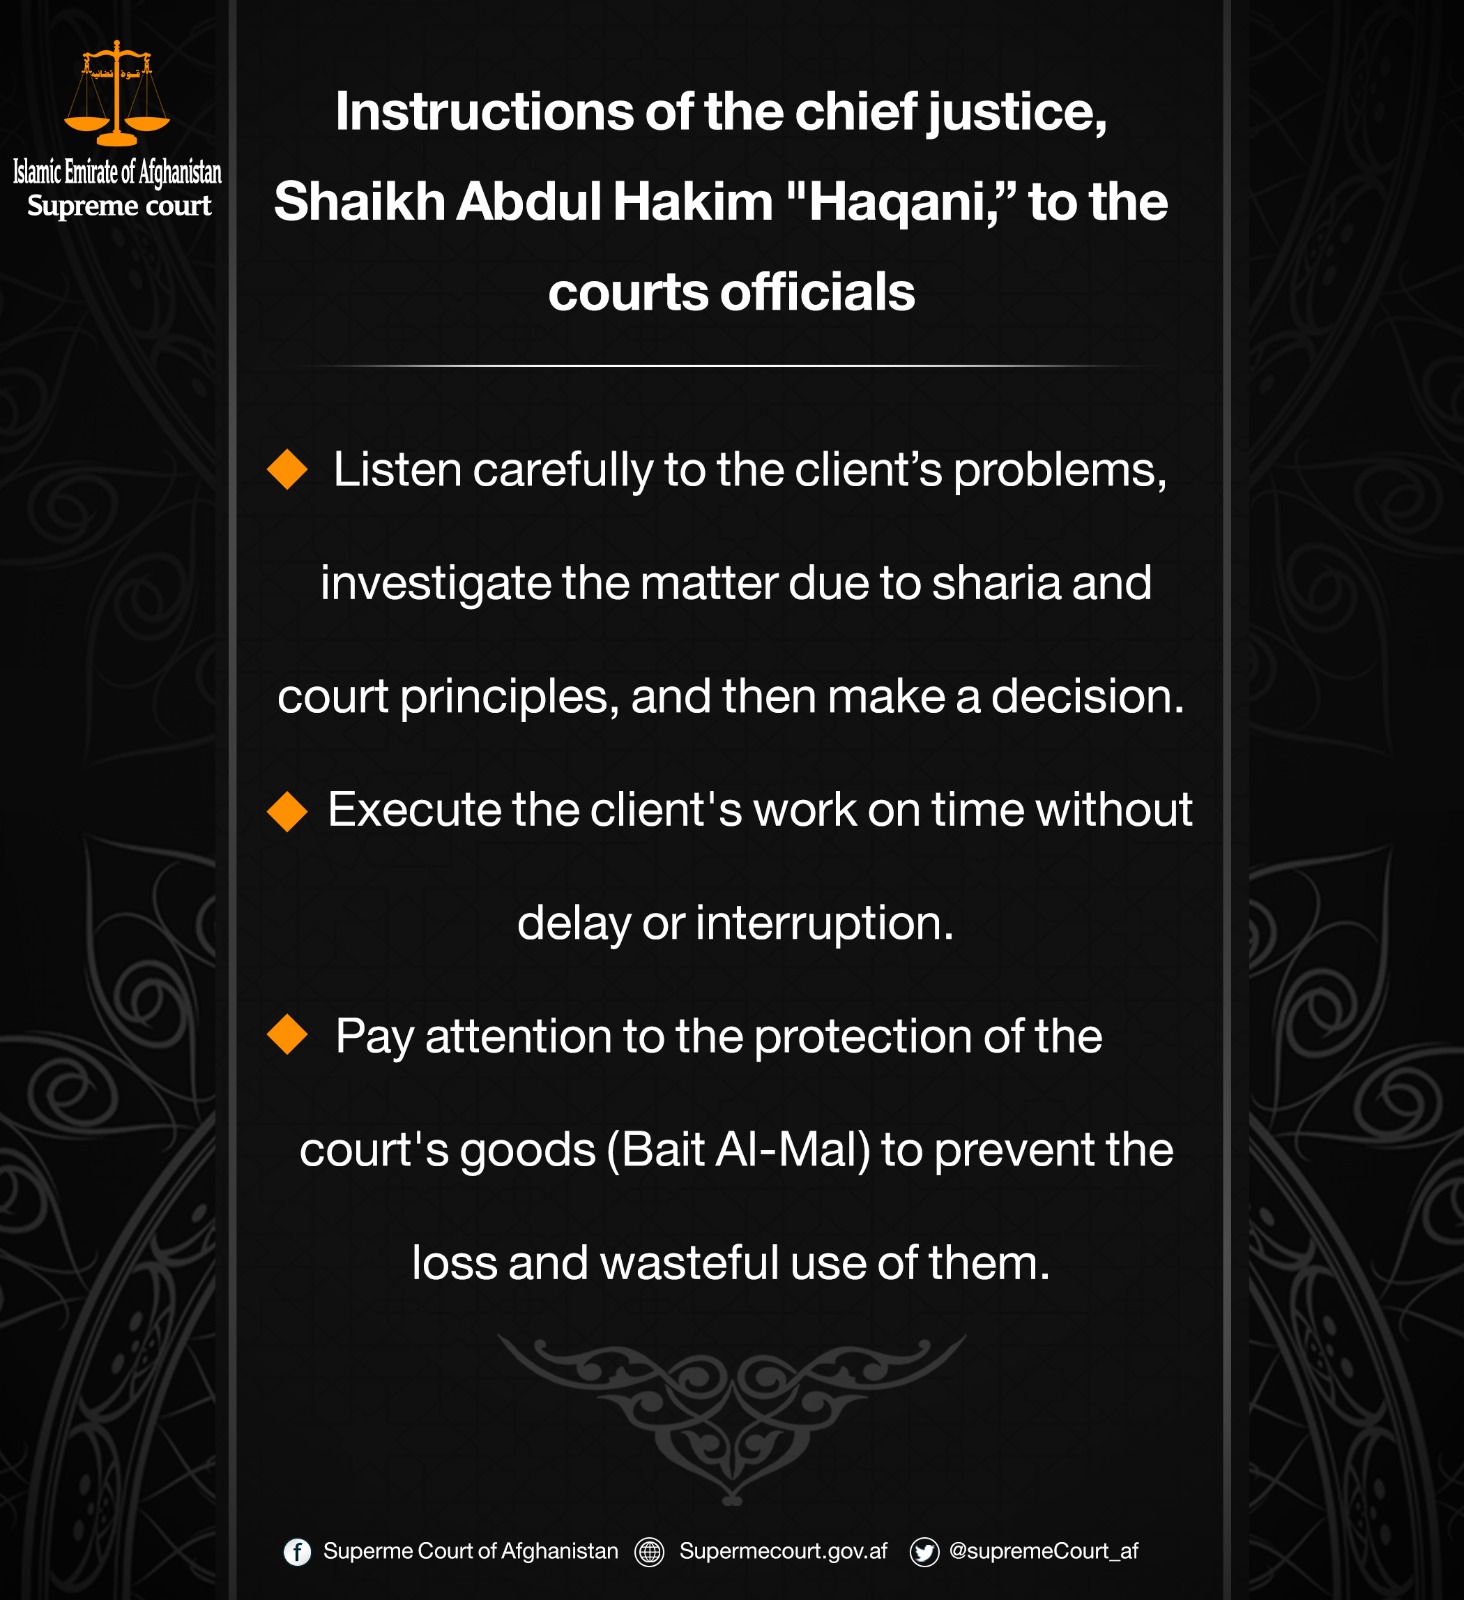 Instructions of the chief justice, Shaikh Abdul Hakim "Haqani,” to the courts officials